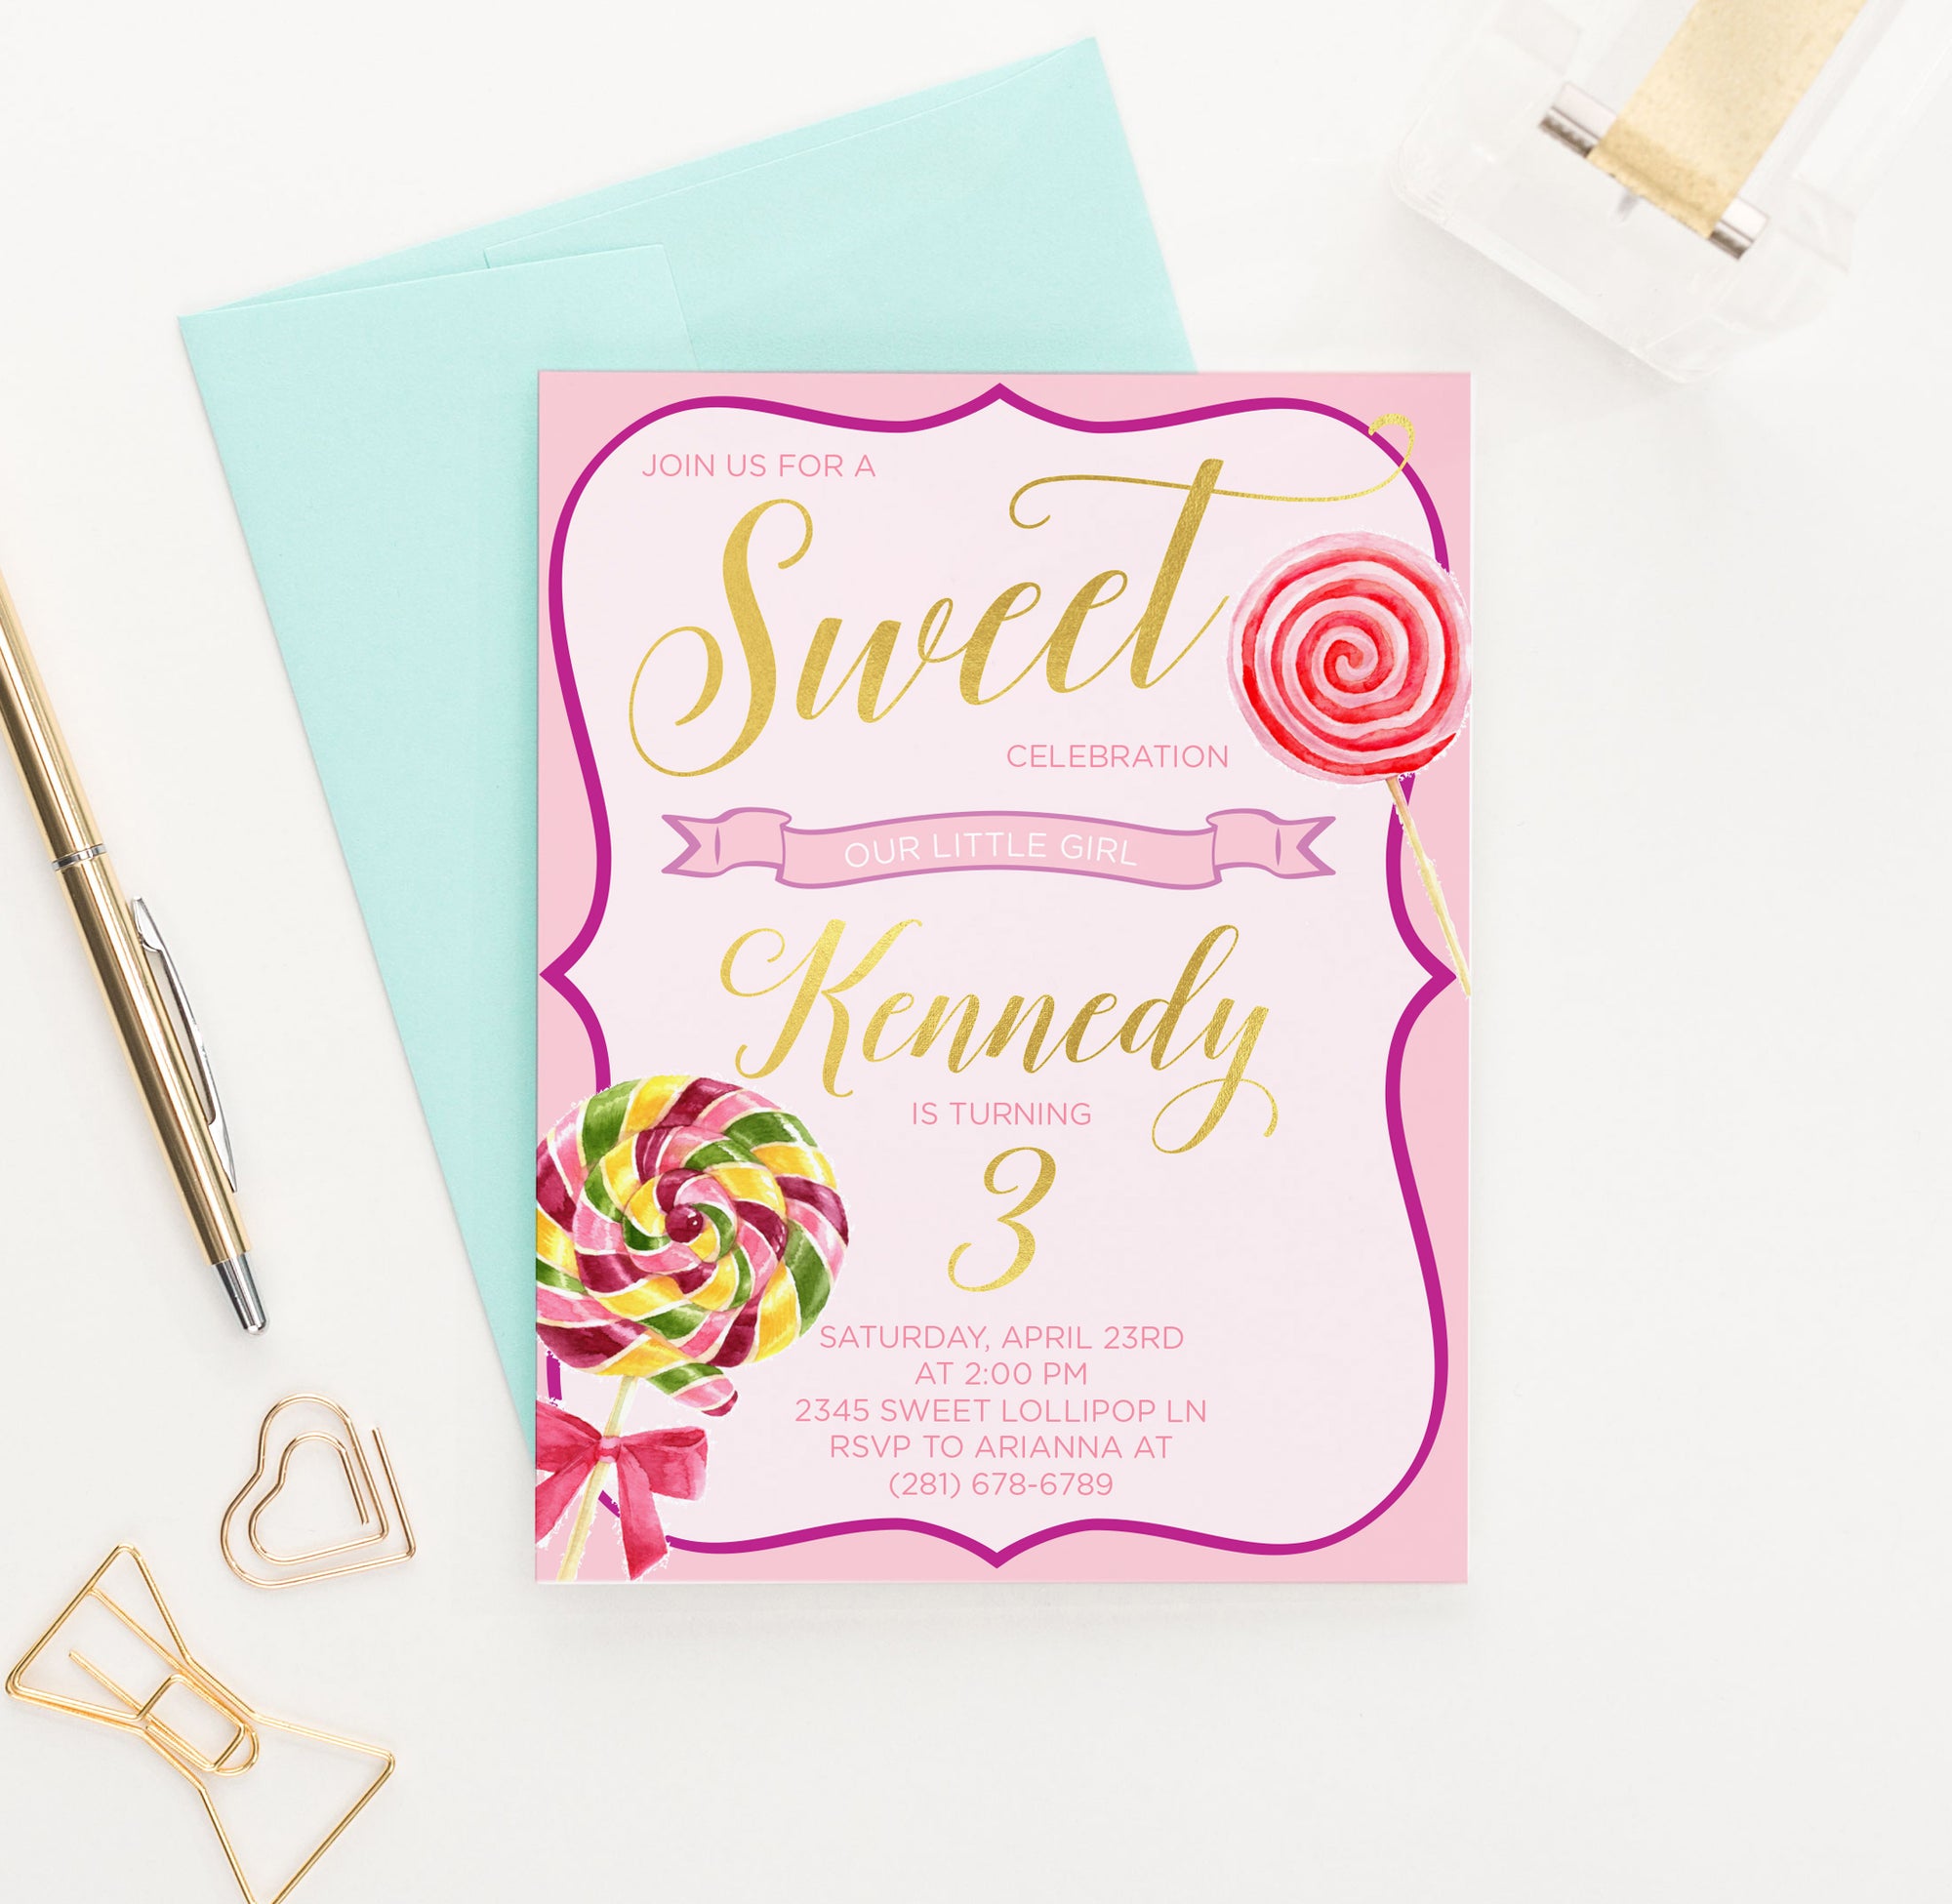 Sweet Celebration Birthday Party Invitations With Candy